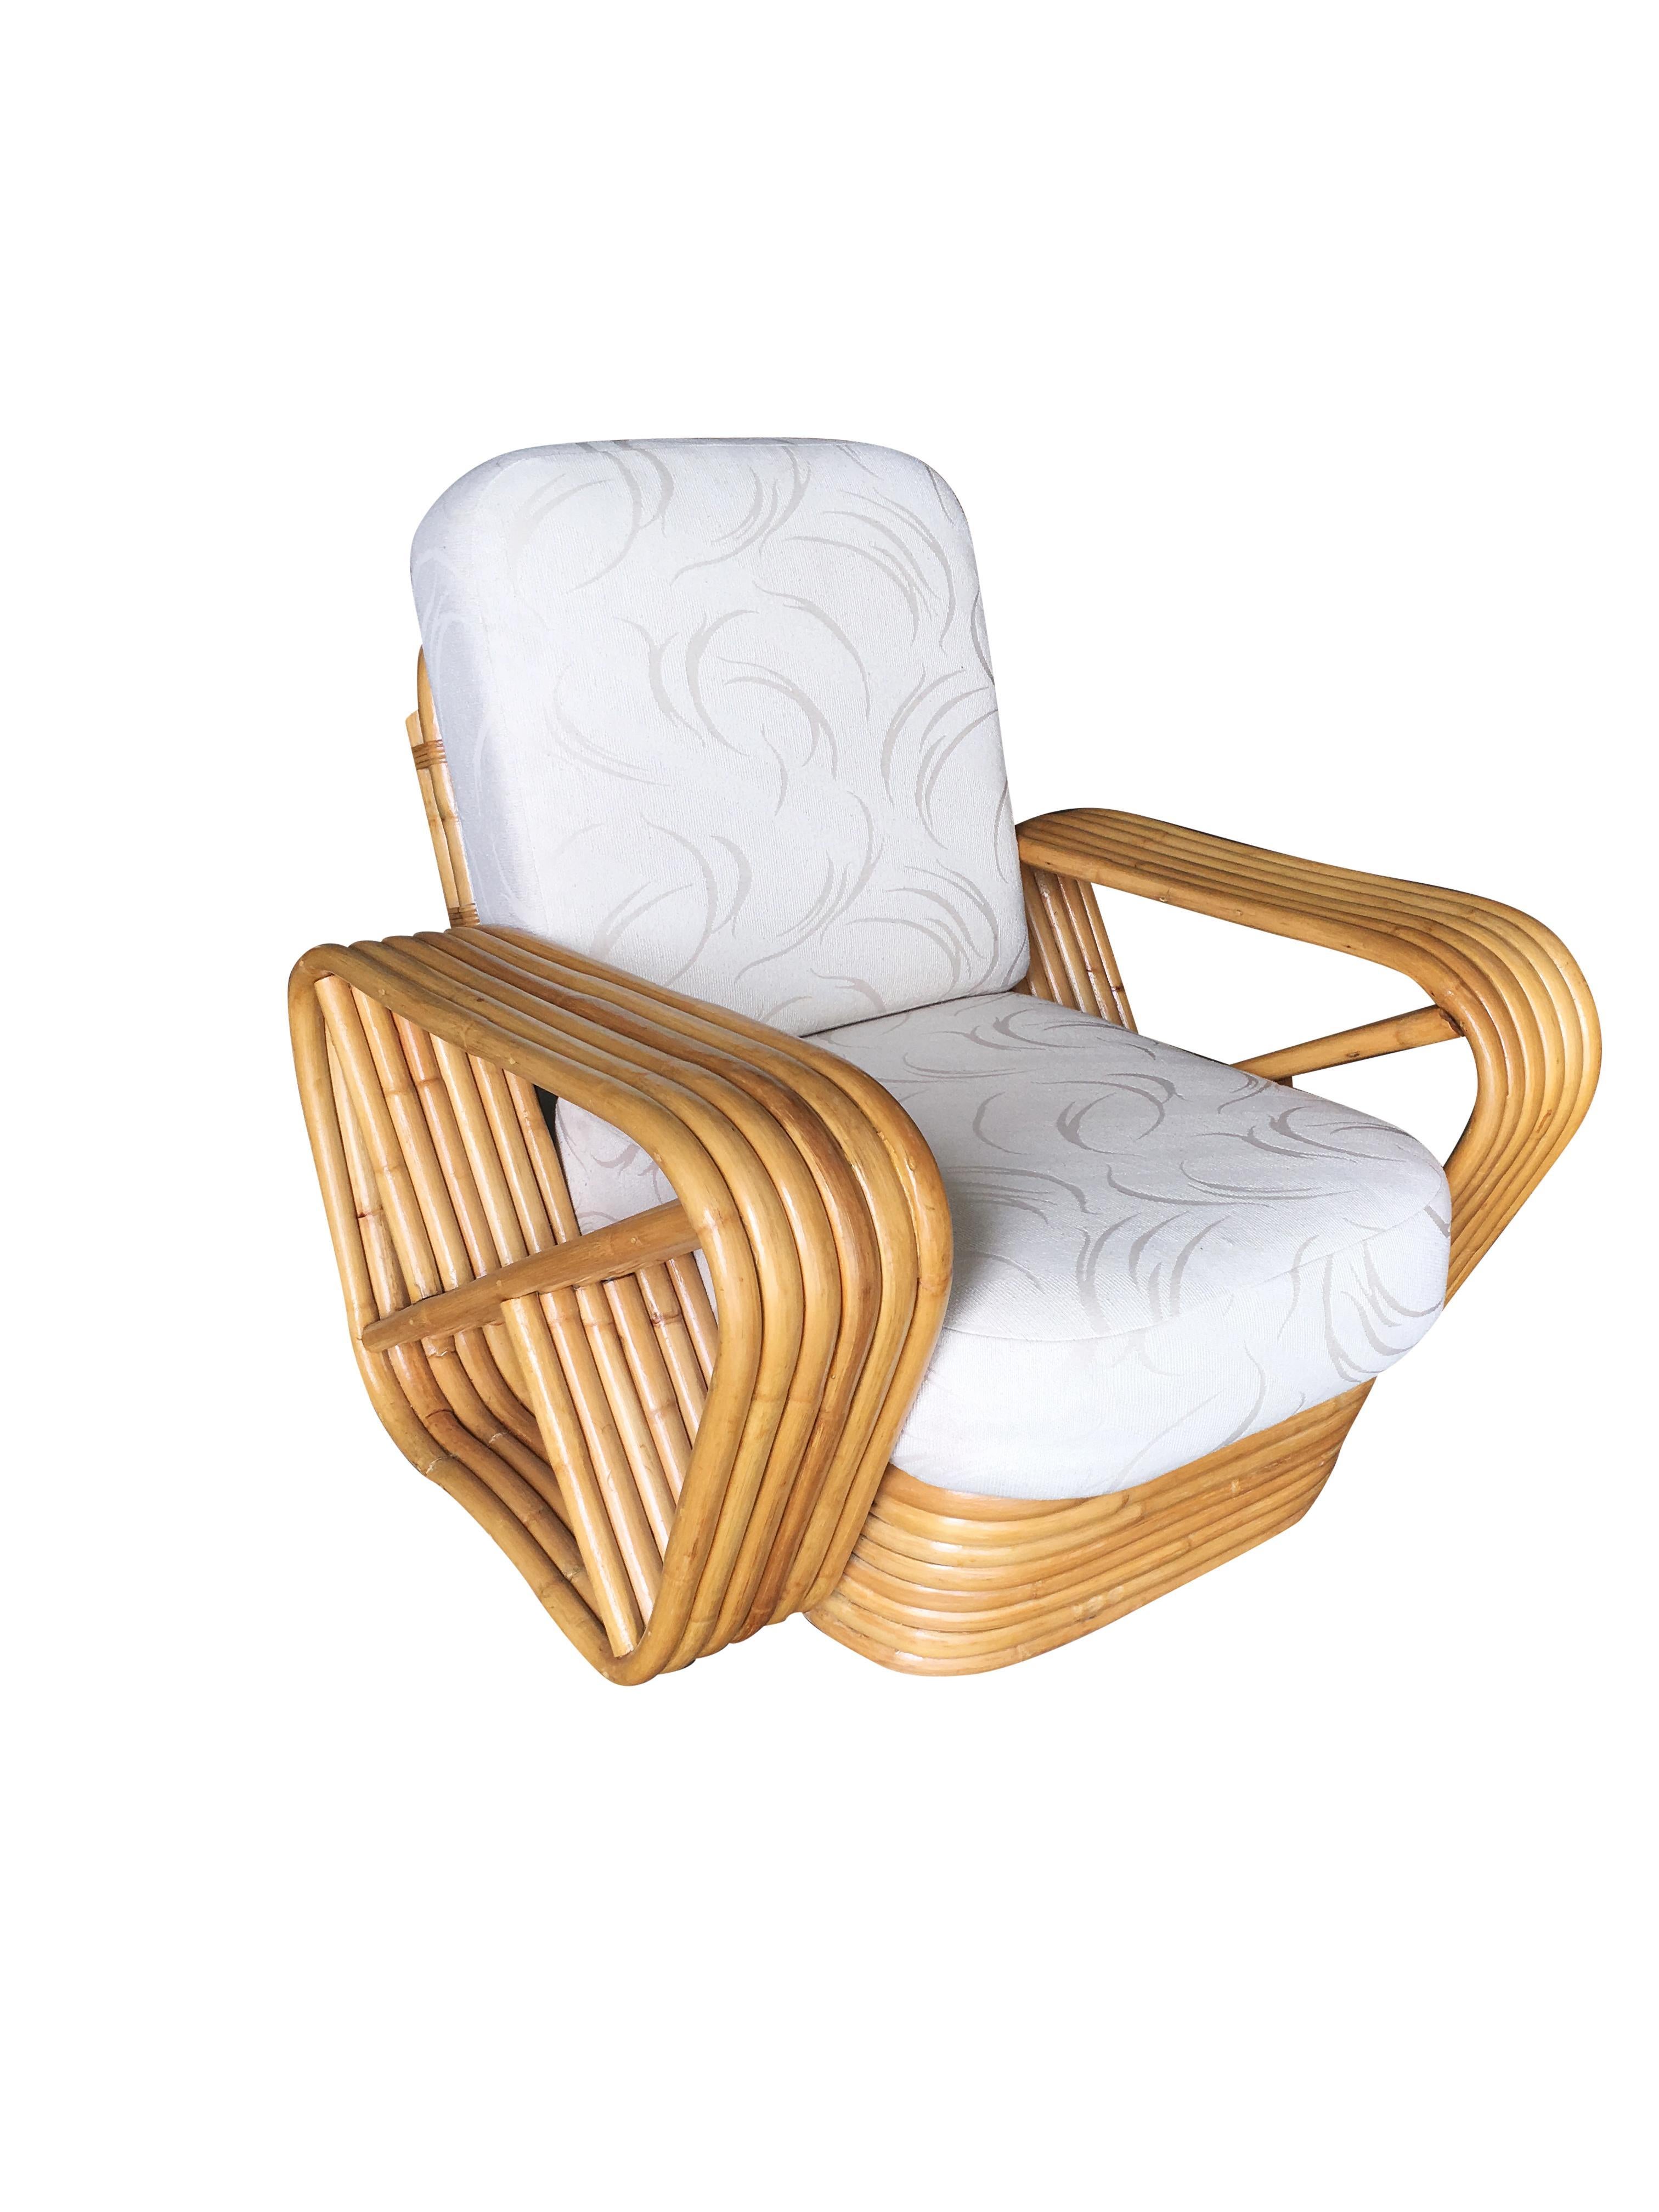 Paul Frankl style Rattan living-room set including a matching sectional sofa and lounge chair. Both feature the famous six strand square pretzel side arms and stacked rattan base originally designed by Paul Frankl. The seats are covered in palm leaf